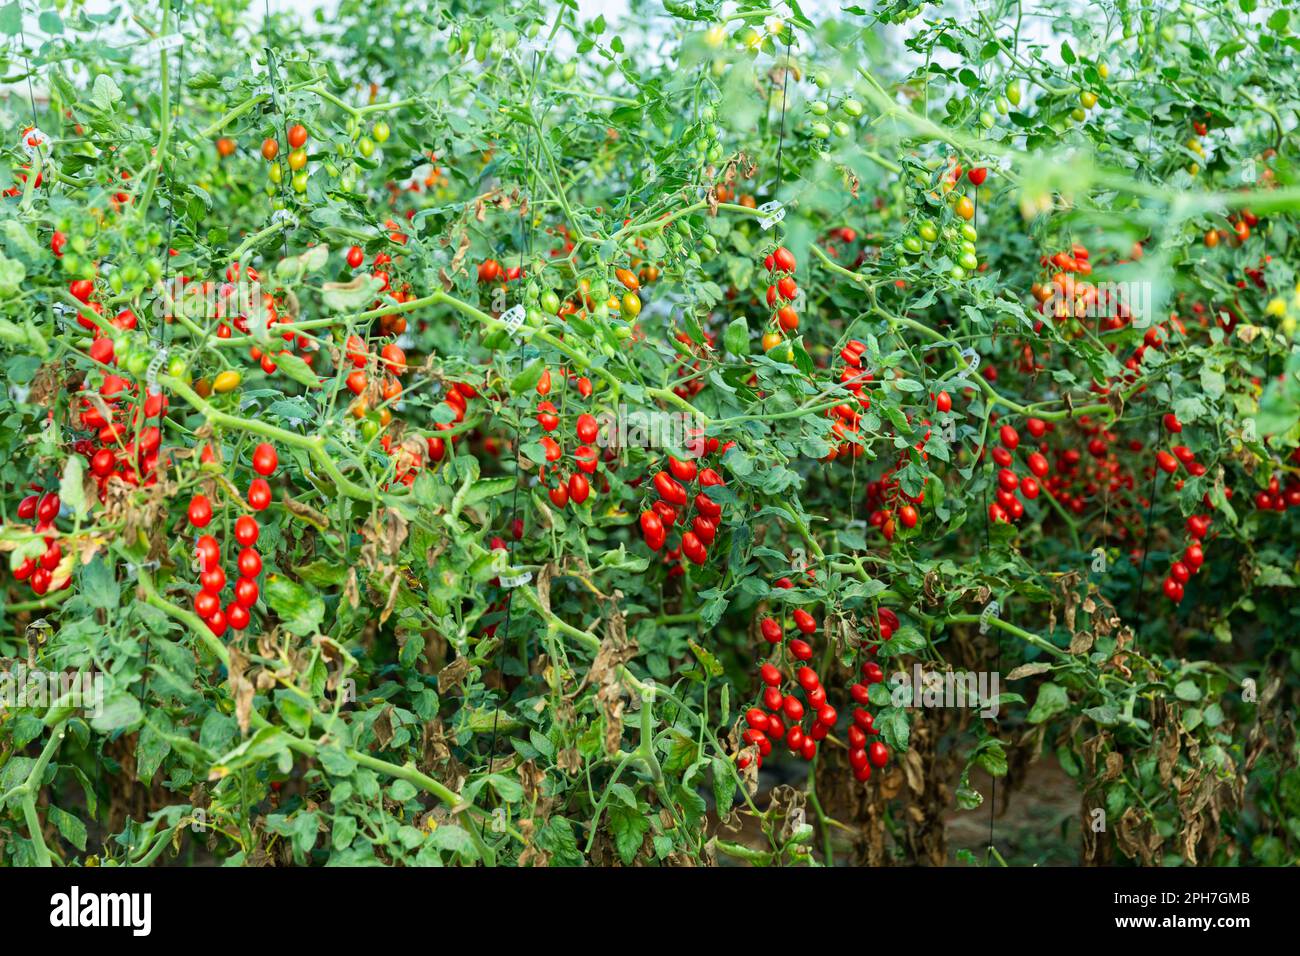 Cherry tomatoes growing on bushes in glasshouse Stock Photo